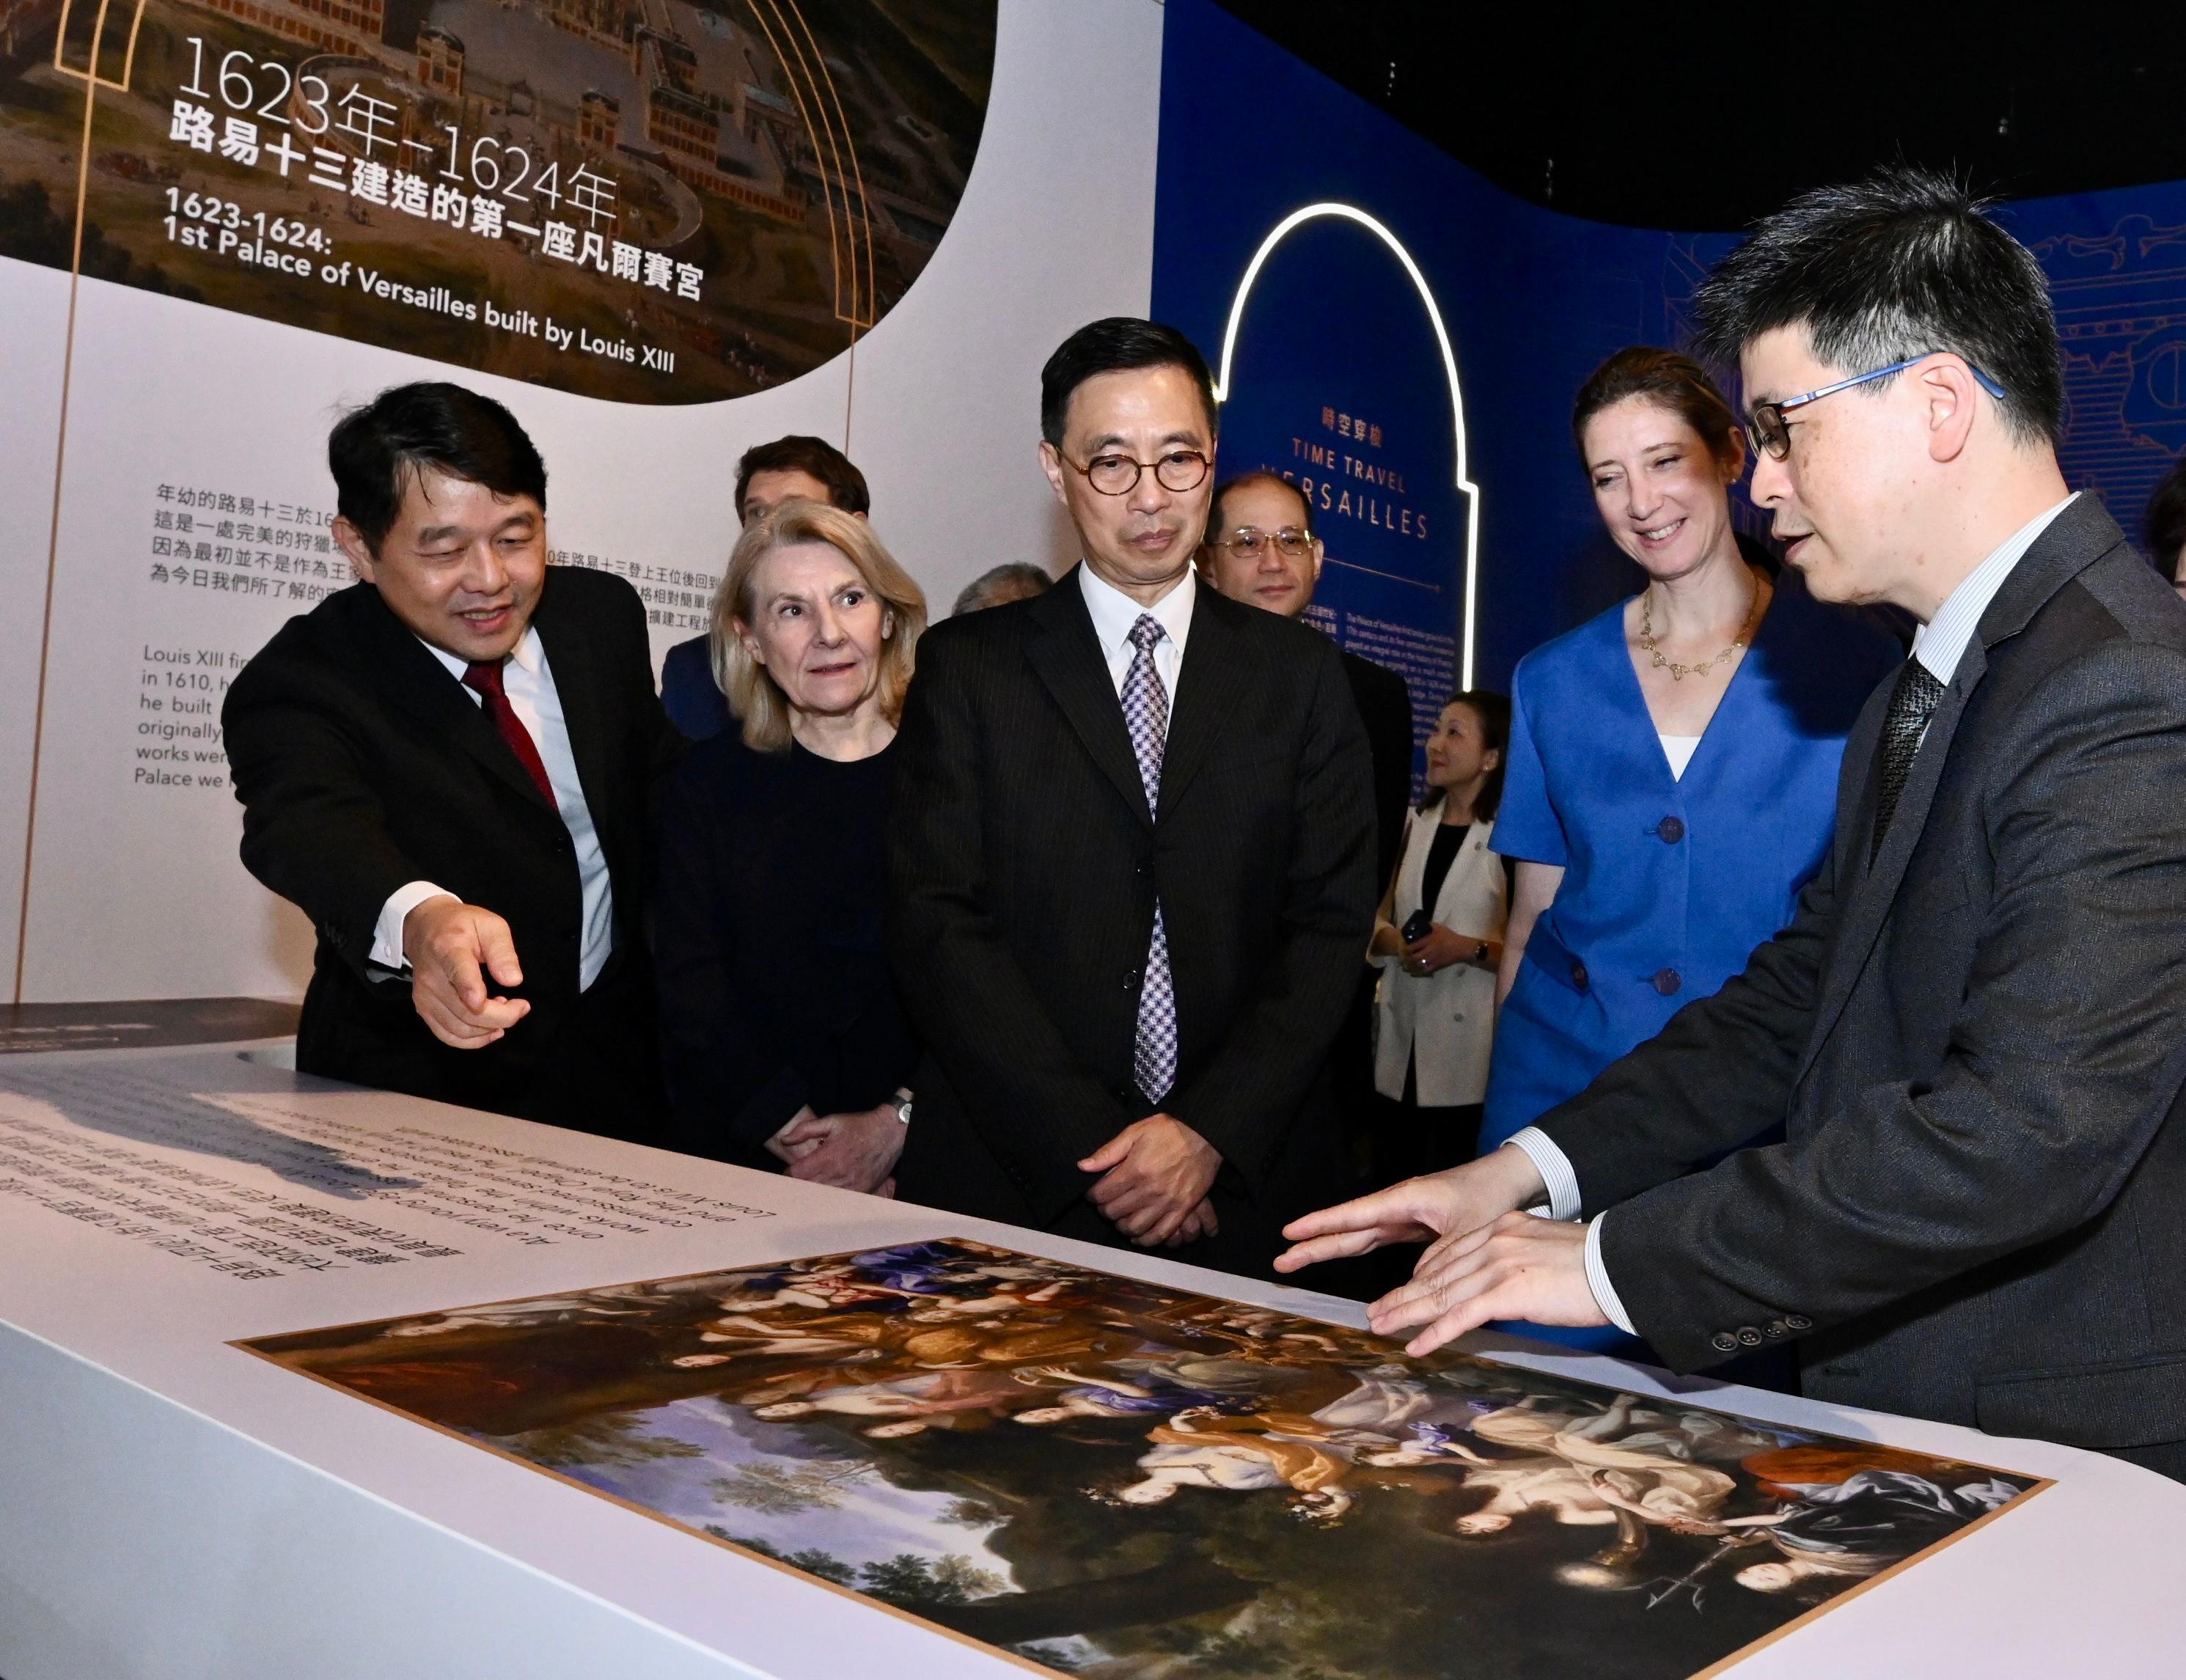 The opening ceremony for the exhibition "Virtually Versailles" was held today (April 19) at the Hong Kong Heritage Museum (HKHM). Photo shows officiating guests the Secretary for Culture, Sports and Tourism, Mr Kevin Yeung (centre); the Consul General of France in Hong Kong and Macau, Mrs Christile Drulhe (second right); the President of Palace of Versailles, Ms Catherine Pégard (second left); the Museum Director of the HKHM, Mr Brian Lam (first left) and other officiating guests touring the exhibition.